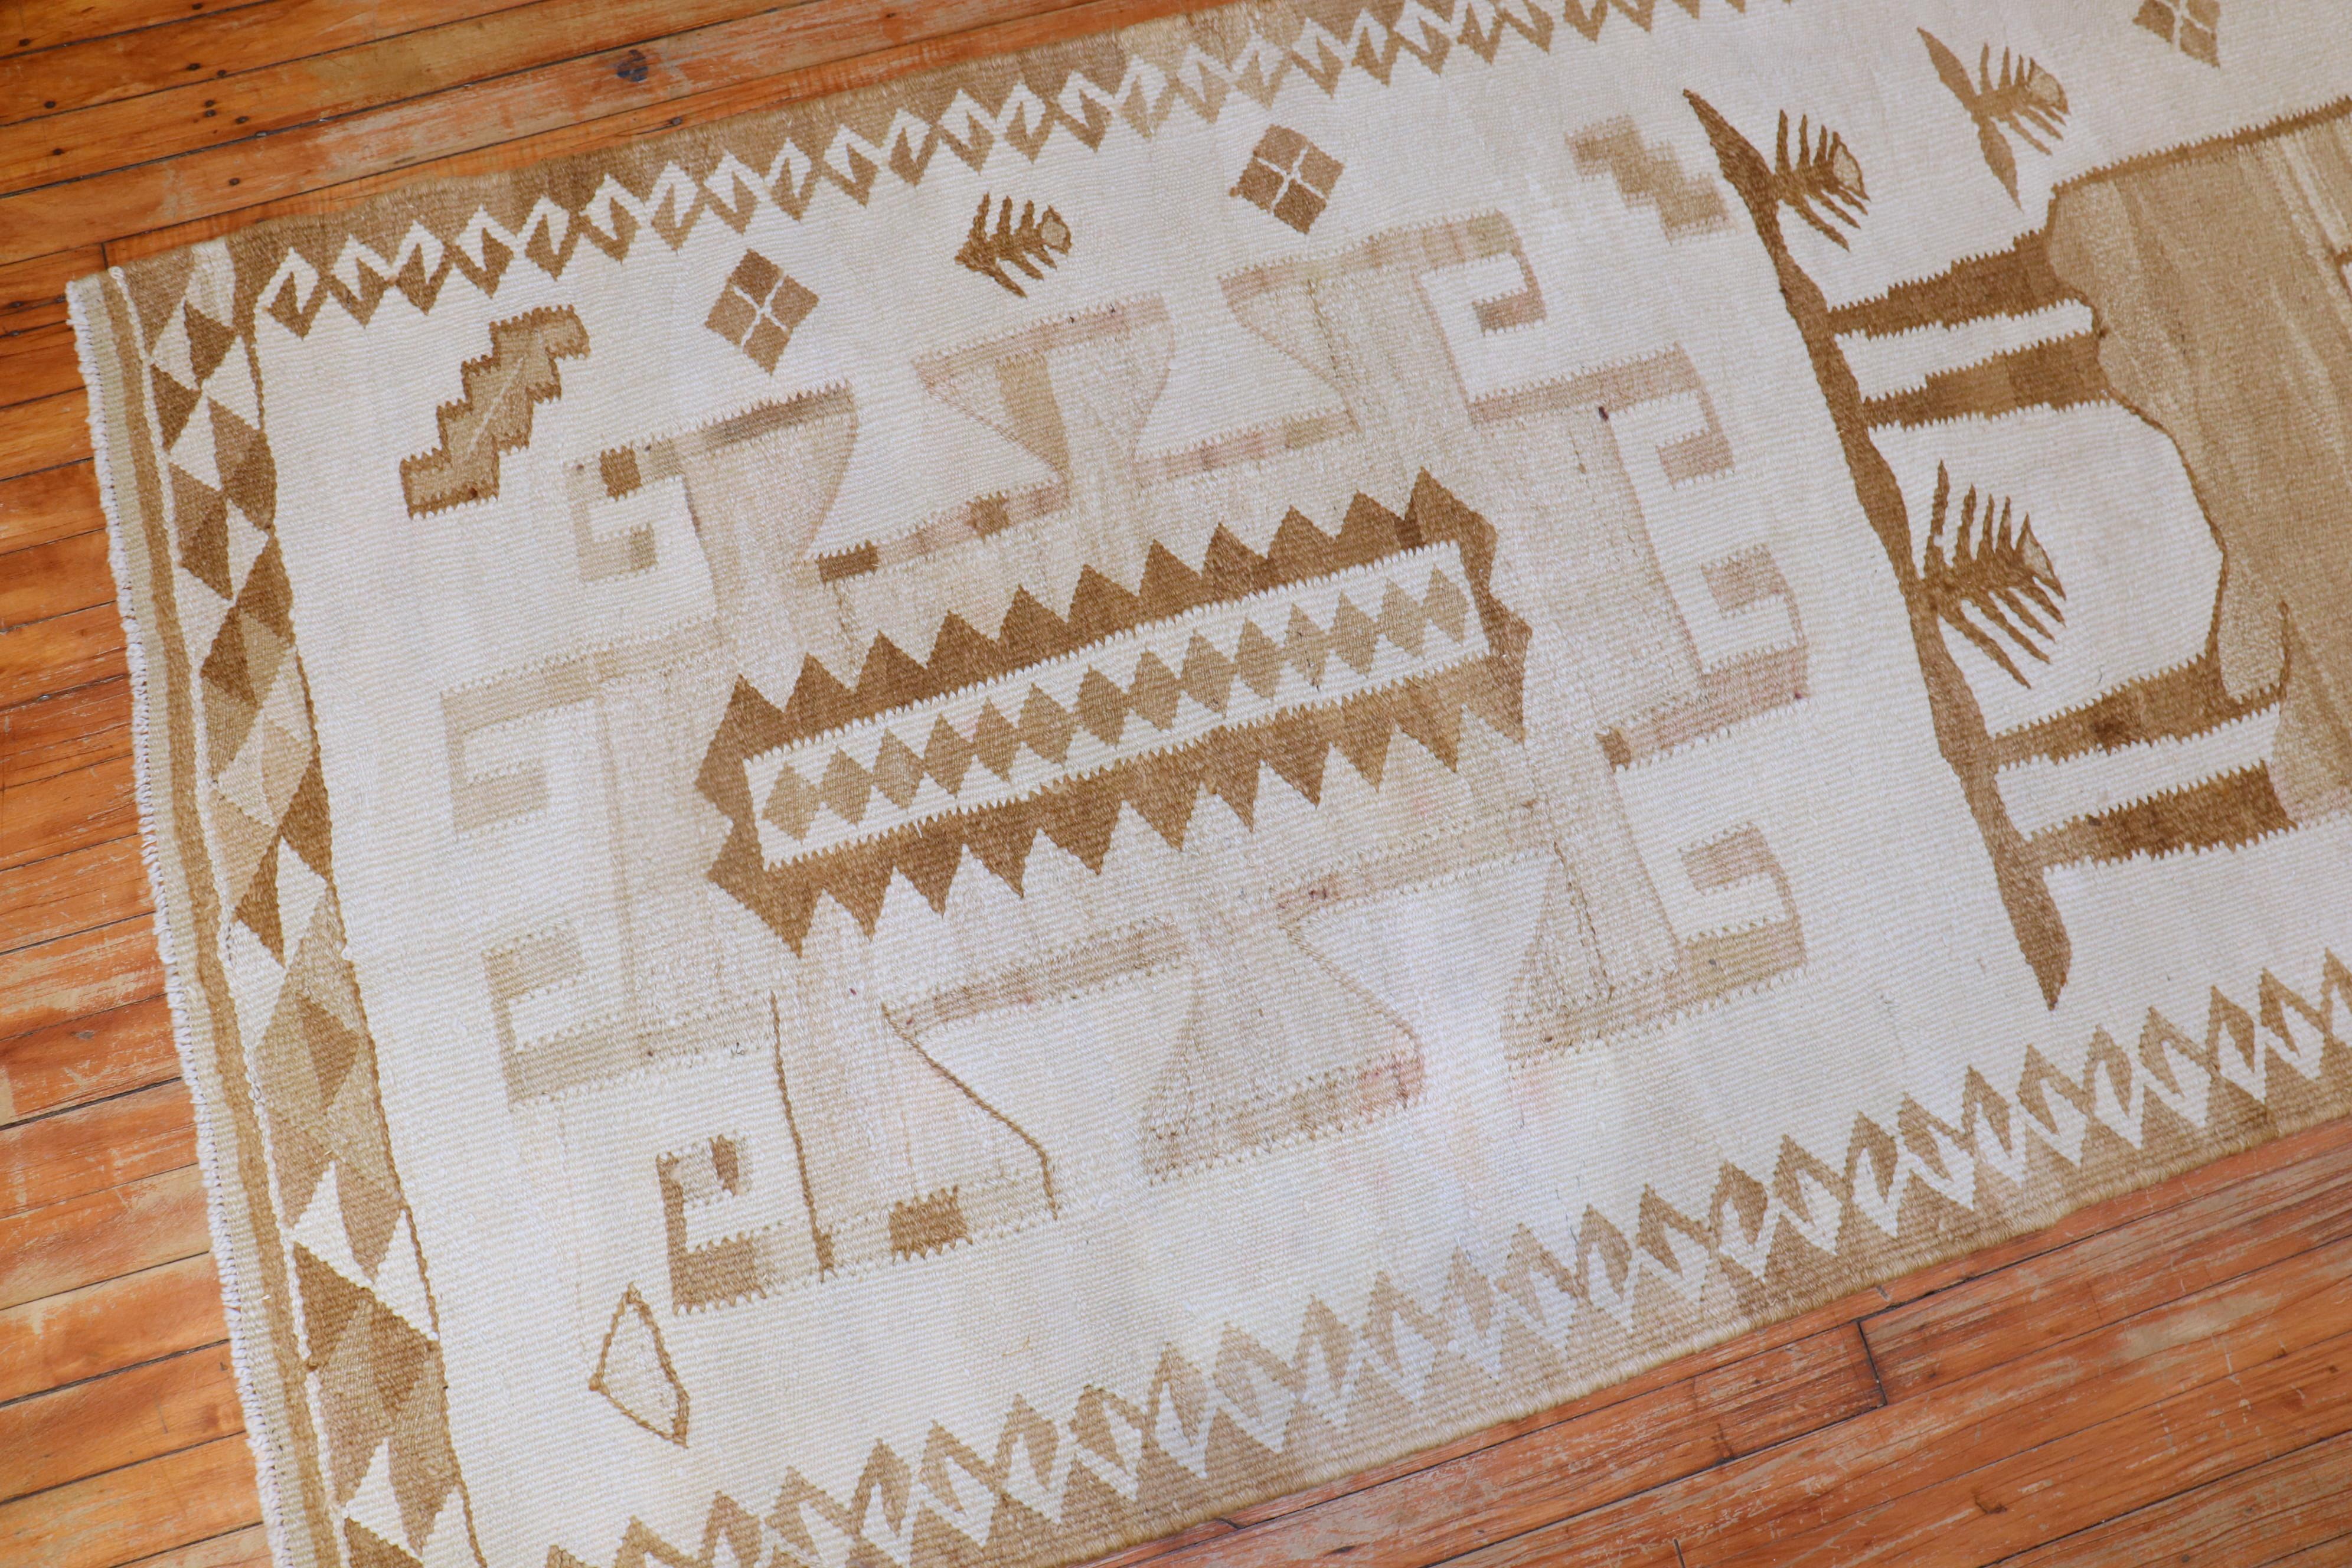 Pictorial Turkish Goat Kilim Runner In Good Condition For Sale In New York, NY